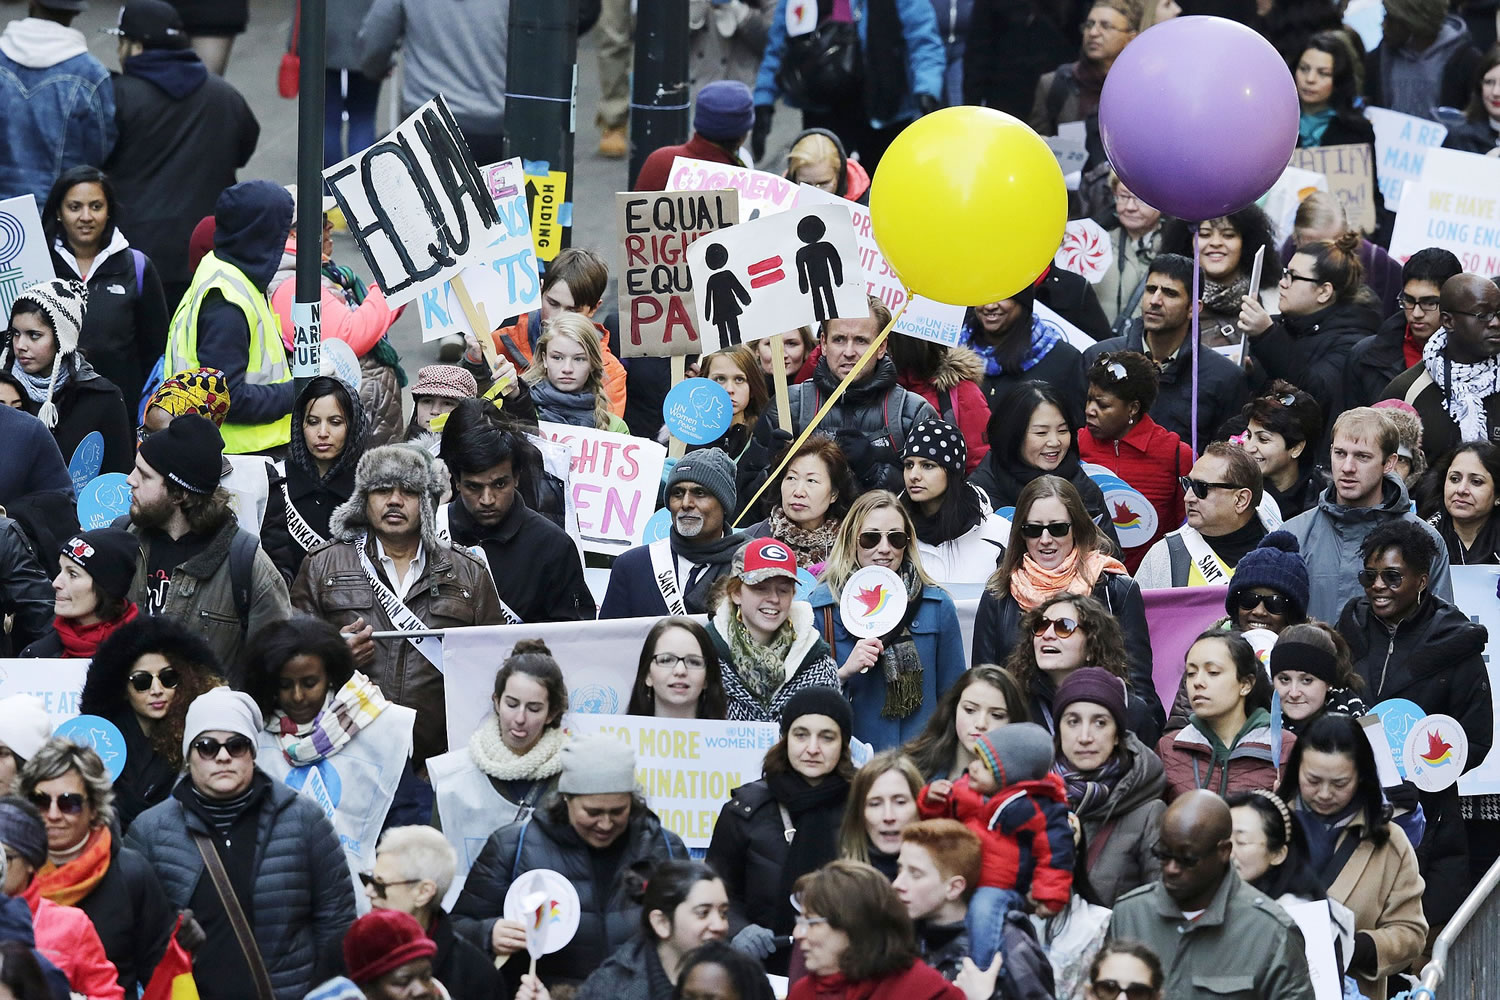 People walk in the International Women's Day march for gender equality and women's rights from the United Nations to Times Square, on Sunday in New York.